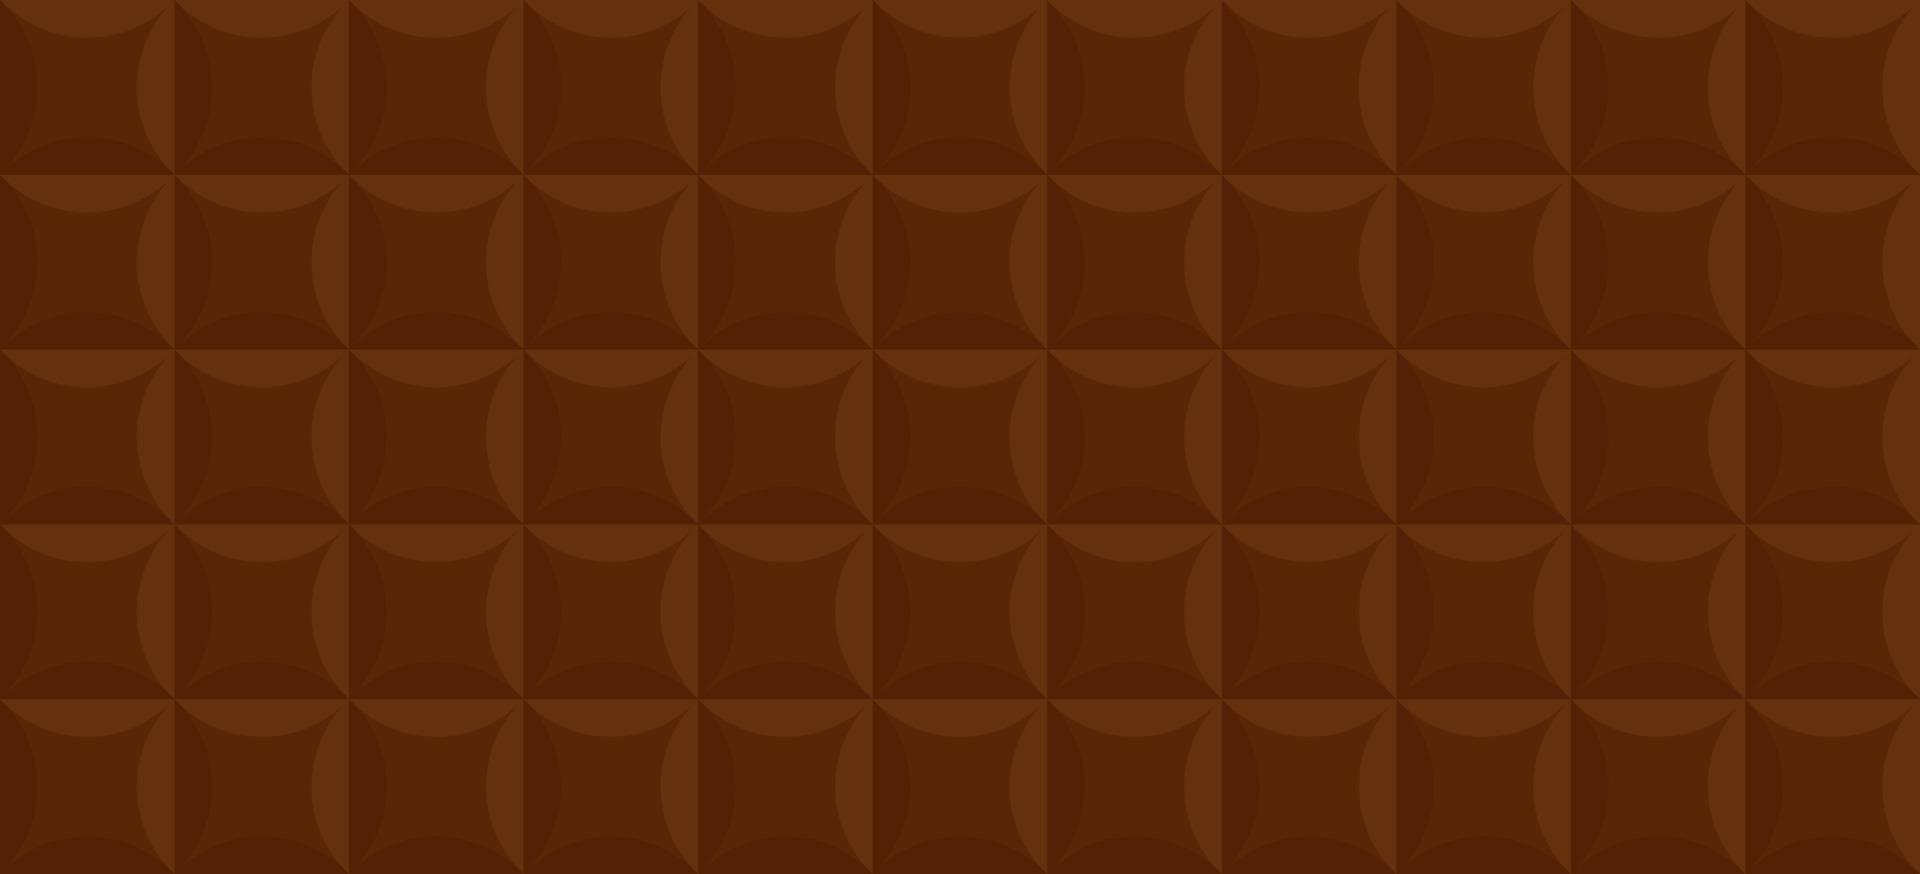 Black or Milk Chocolate Bar. Brown Seamless Background. Geometric Square  Tile Chocolate Pattern. Geometric Surface Template. Abstract Wallpaper  Design. Vector Illustration. 6483365 Vector Art at Vecteezy